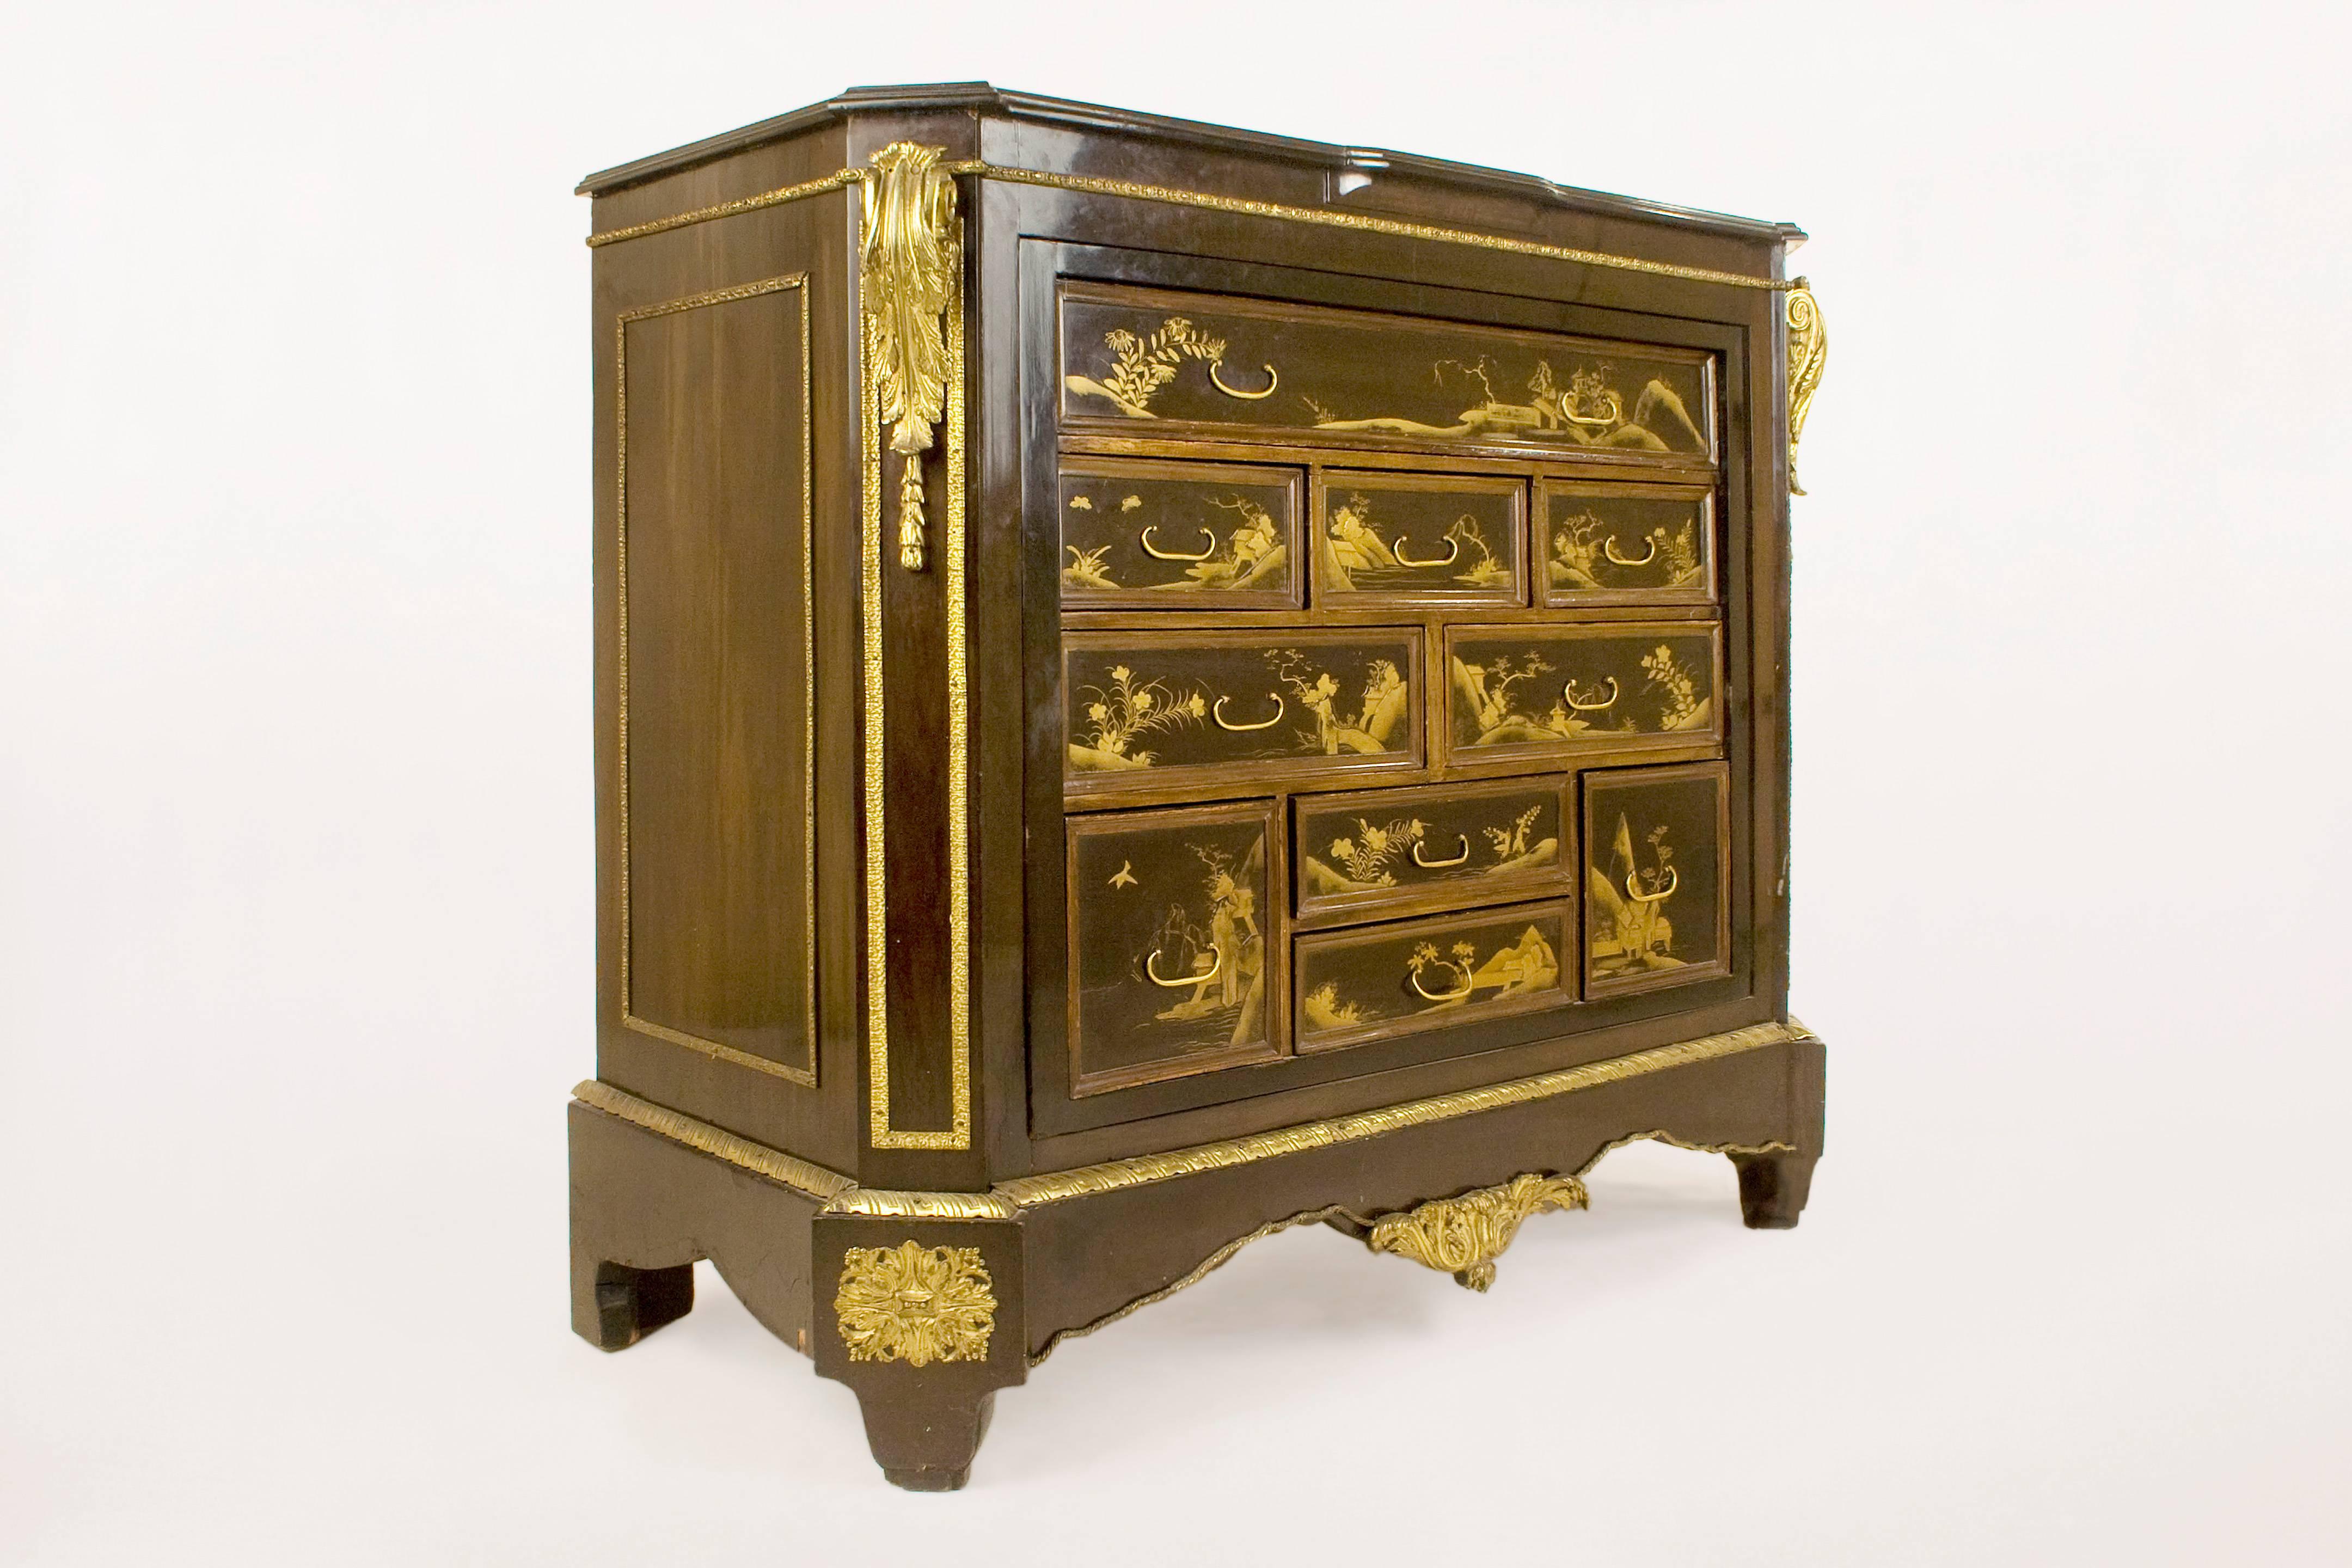 19th century gilt bronze-mounted lacquered commode.
19th century French commode structure made with the drawers of an 18th century lacquered Japanese cabinet.
Unique and very rare piece,
circa mid-19th century, Paris, France.
Good antique